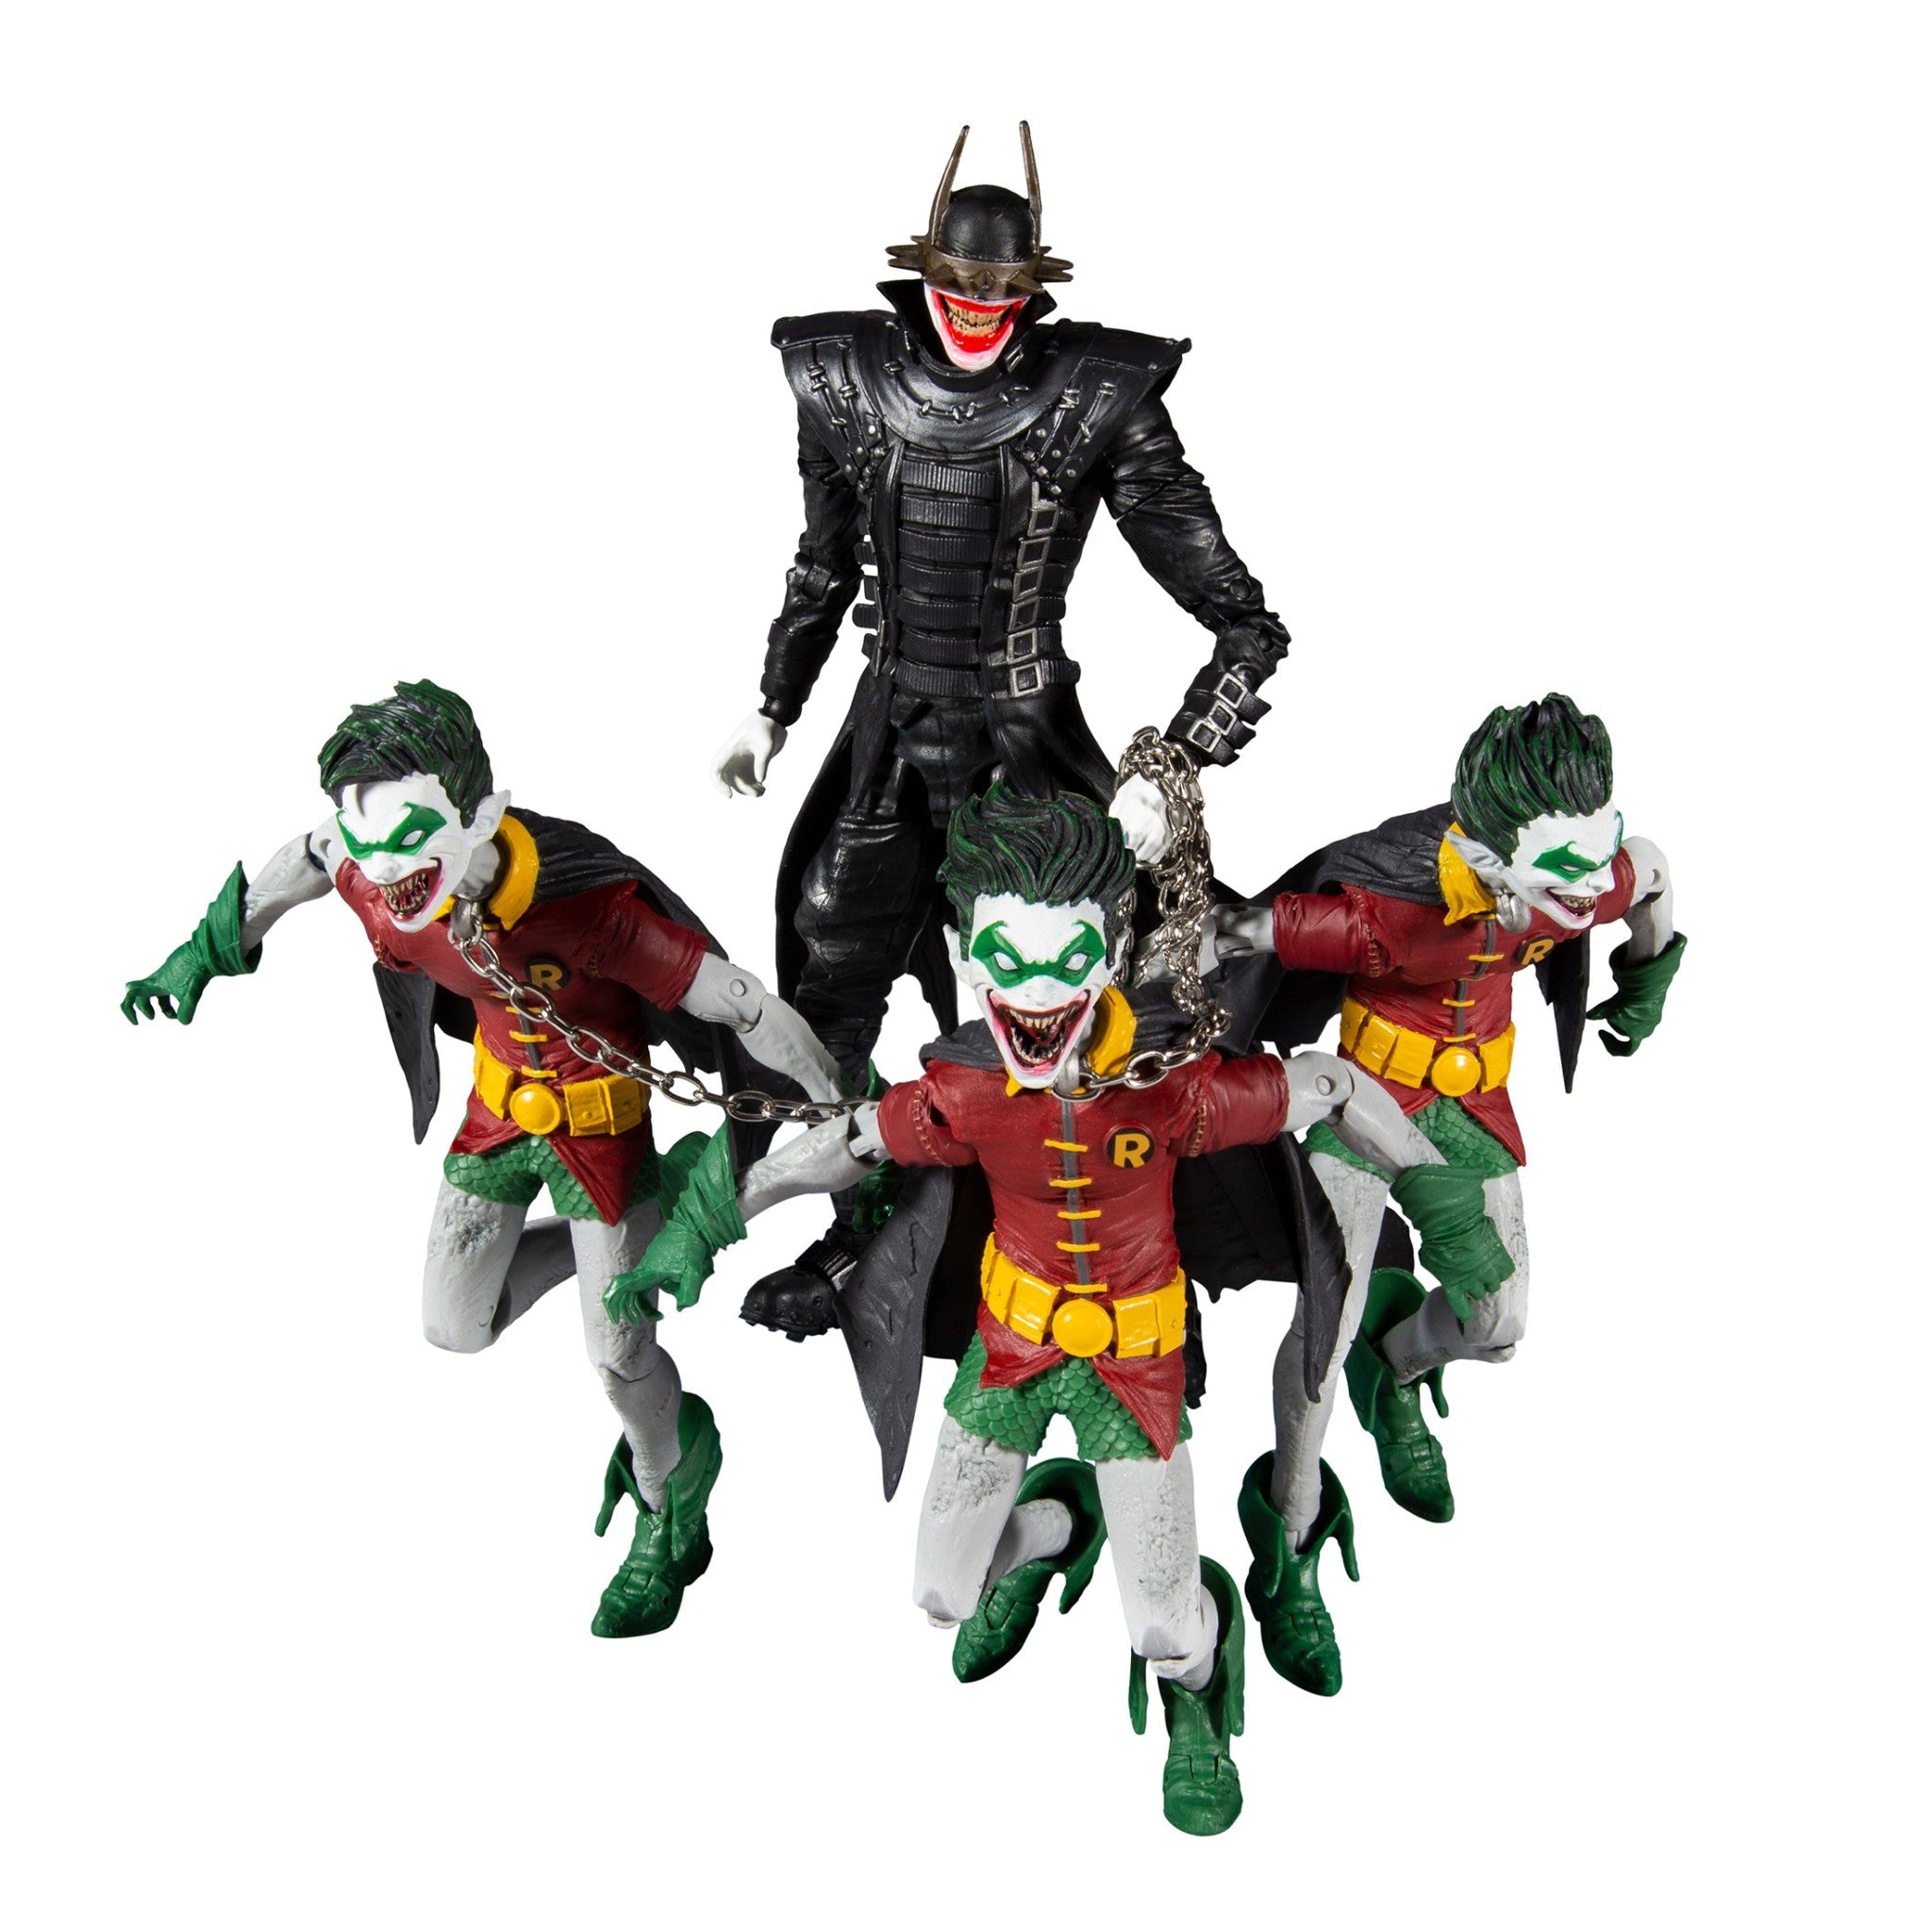 DC Multiverse Batman Who Laughs and Robins Earth-22 Multipack - McFarlane Toys